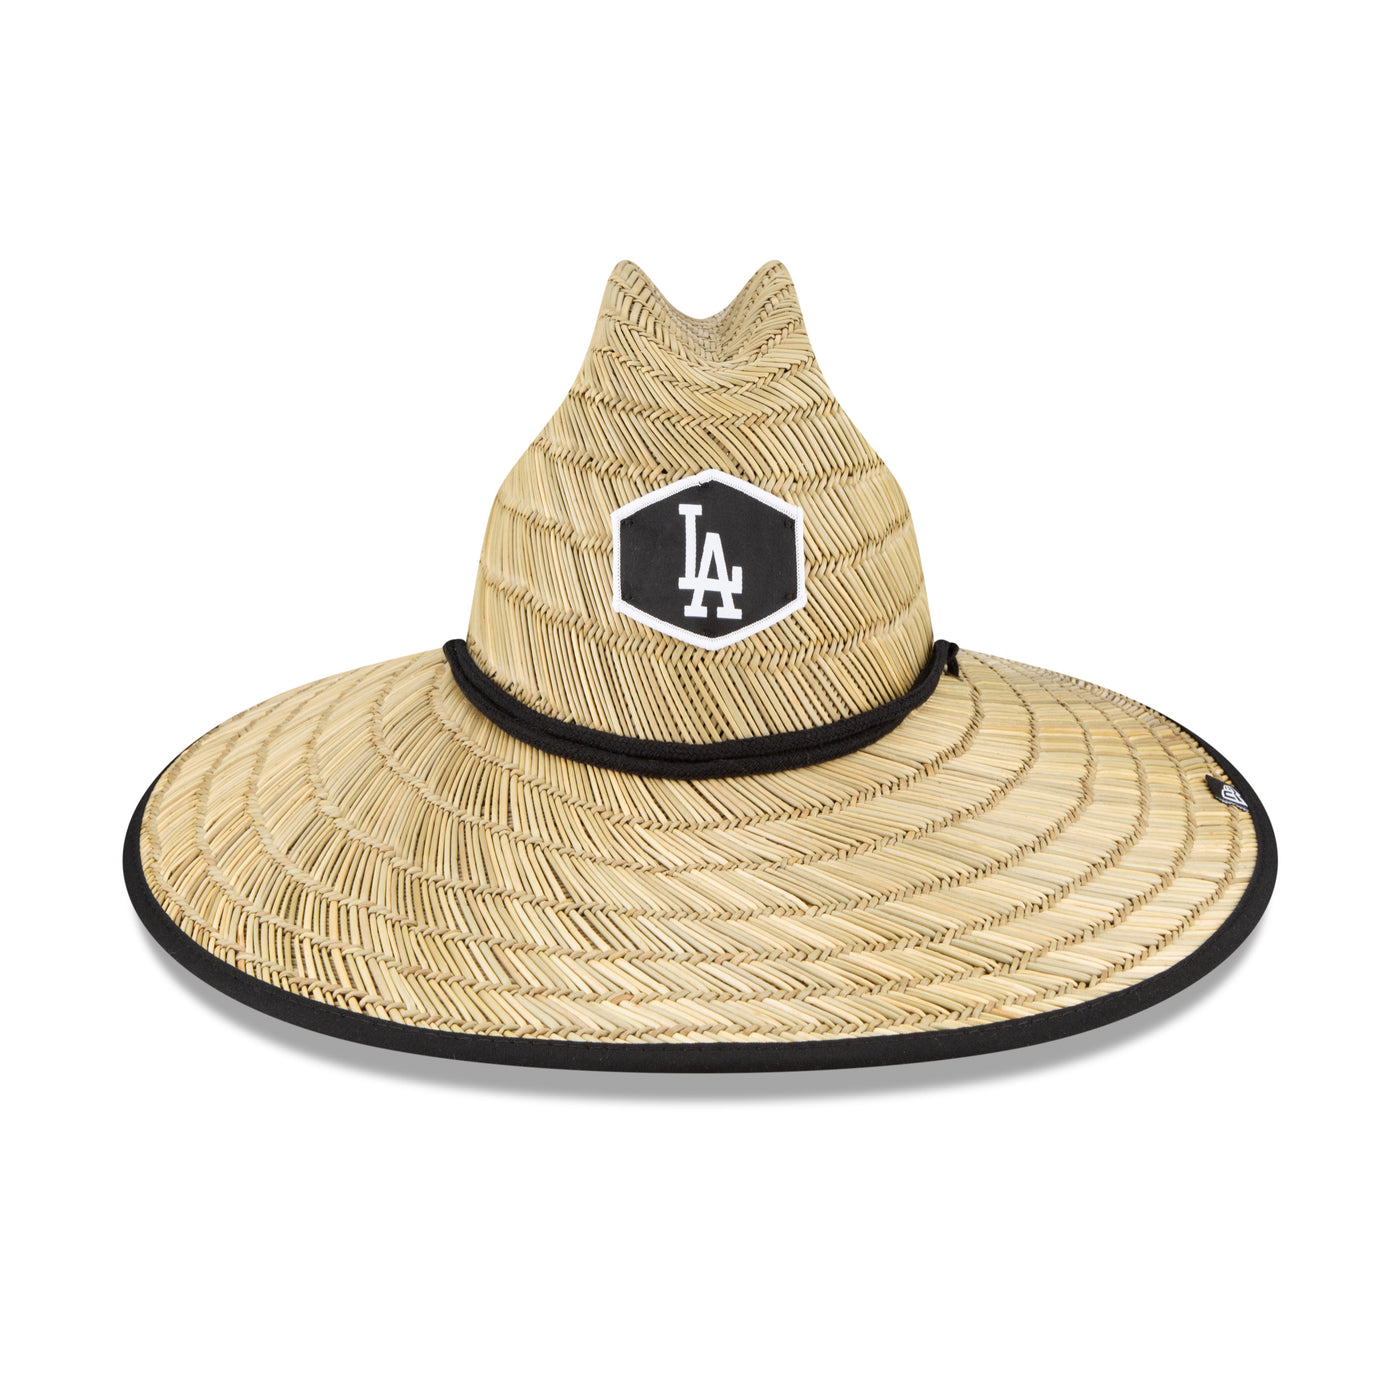 Straw hat with black chin strap, black brim, and a Dodgers patch on the front